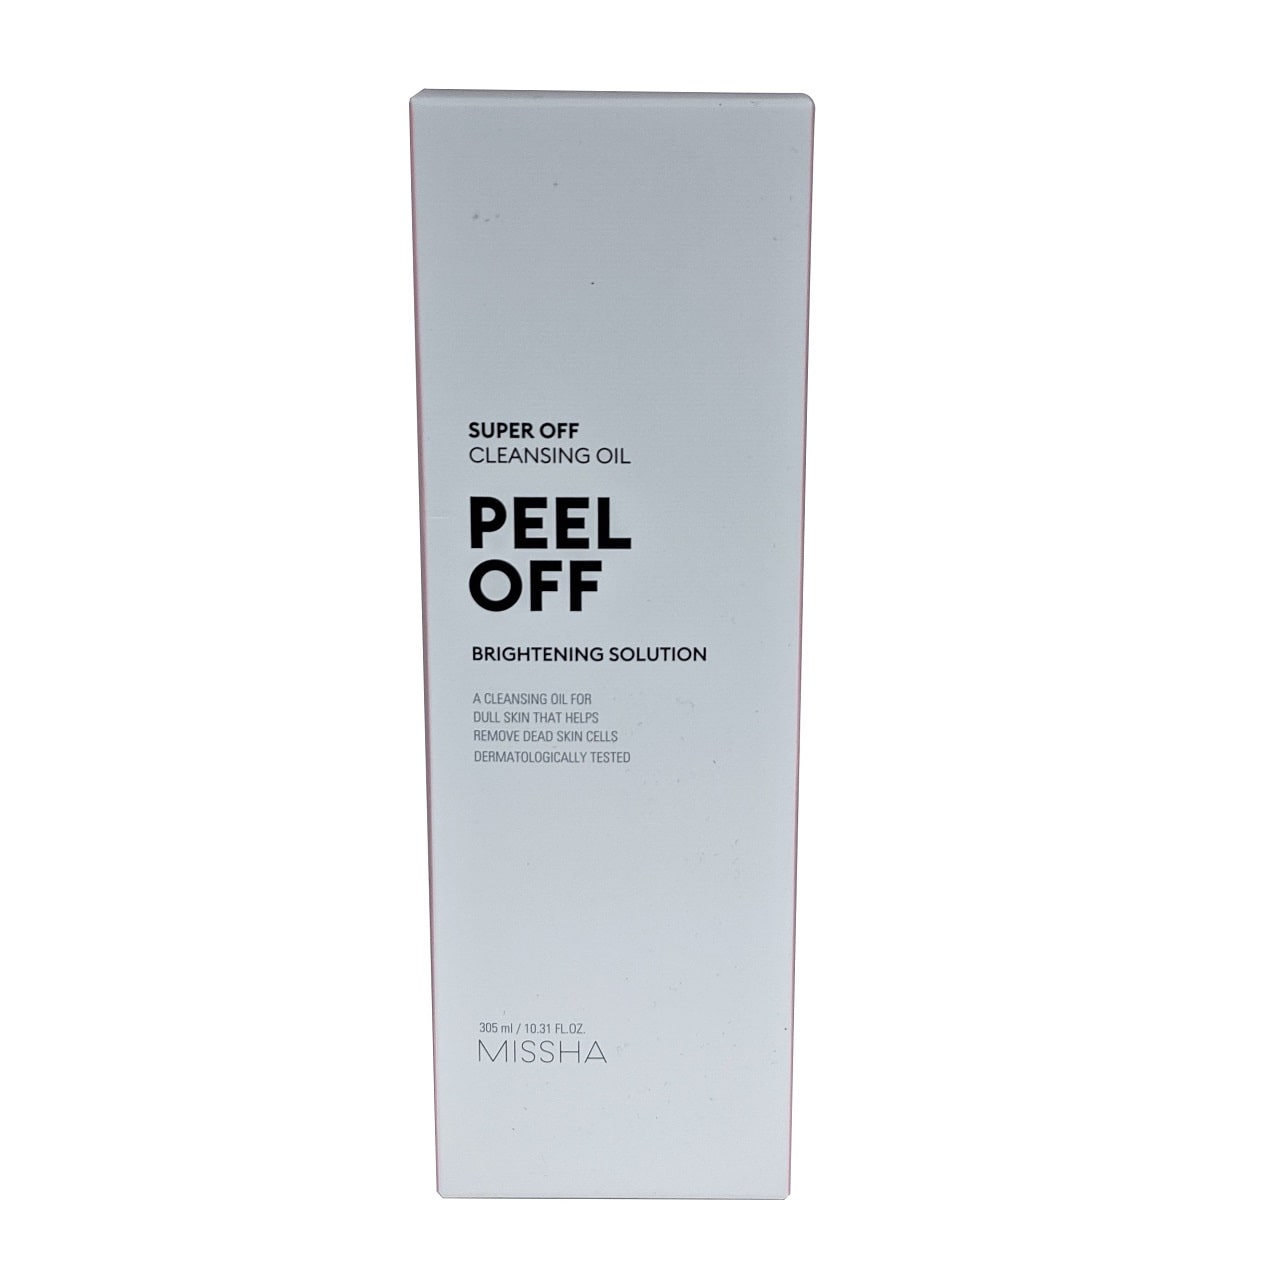 Product label for MISSHA Super Off Cleansing Oil Peel Off 